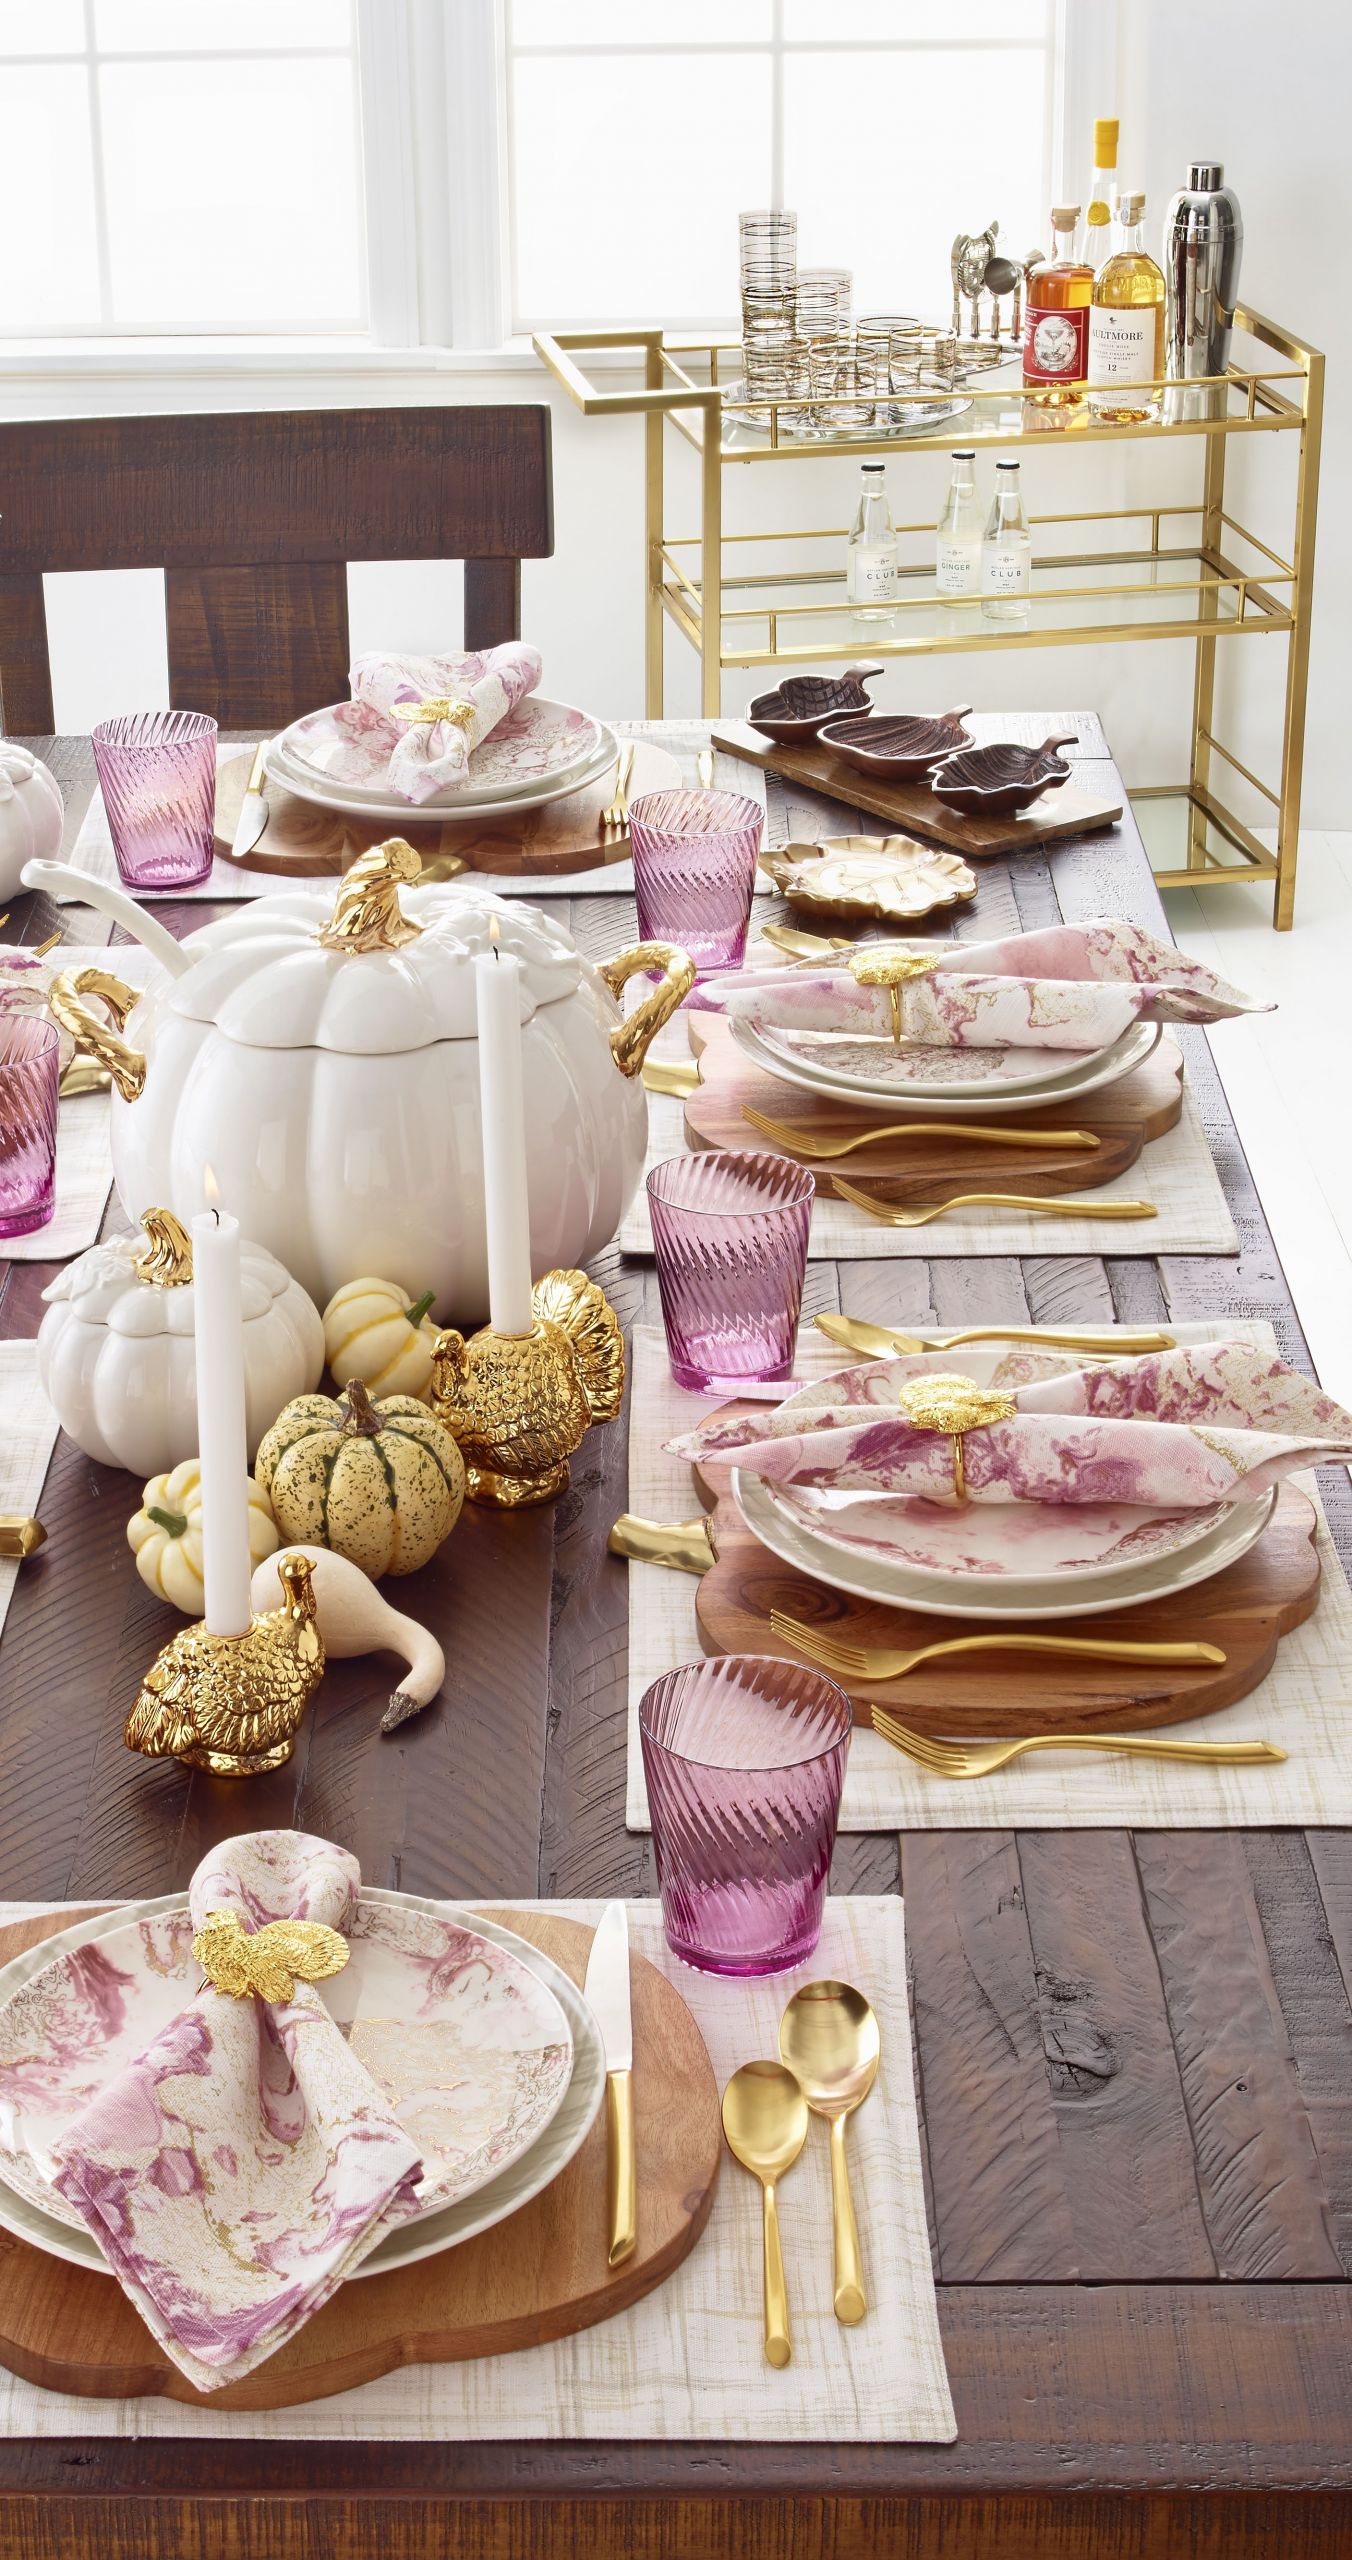 Thanksgiving Table Settings Martha Stewart
 Bored with traditional whiteware Inspired by plates in her own